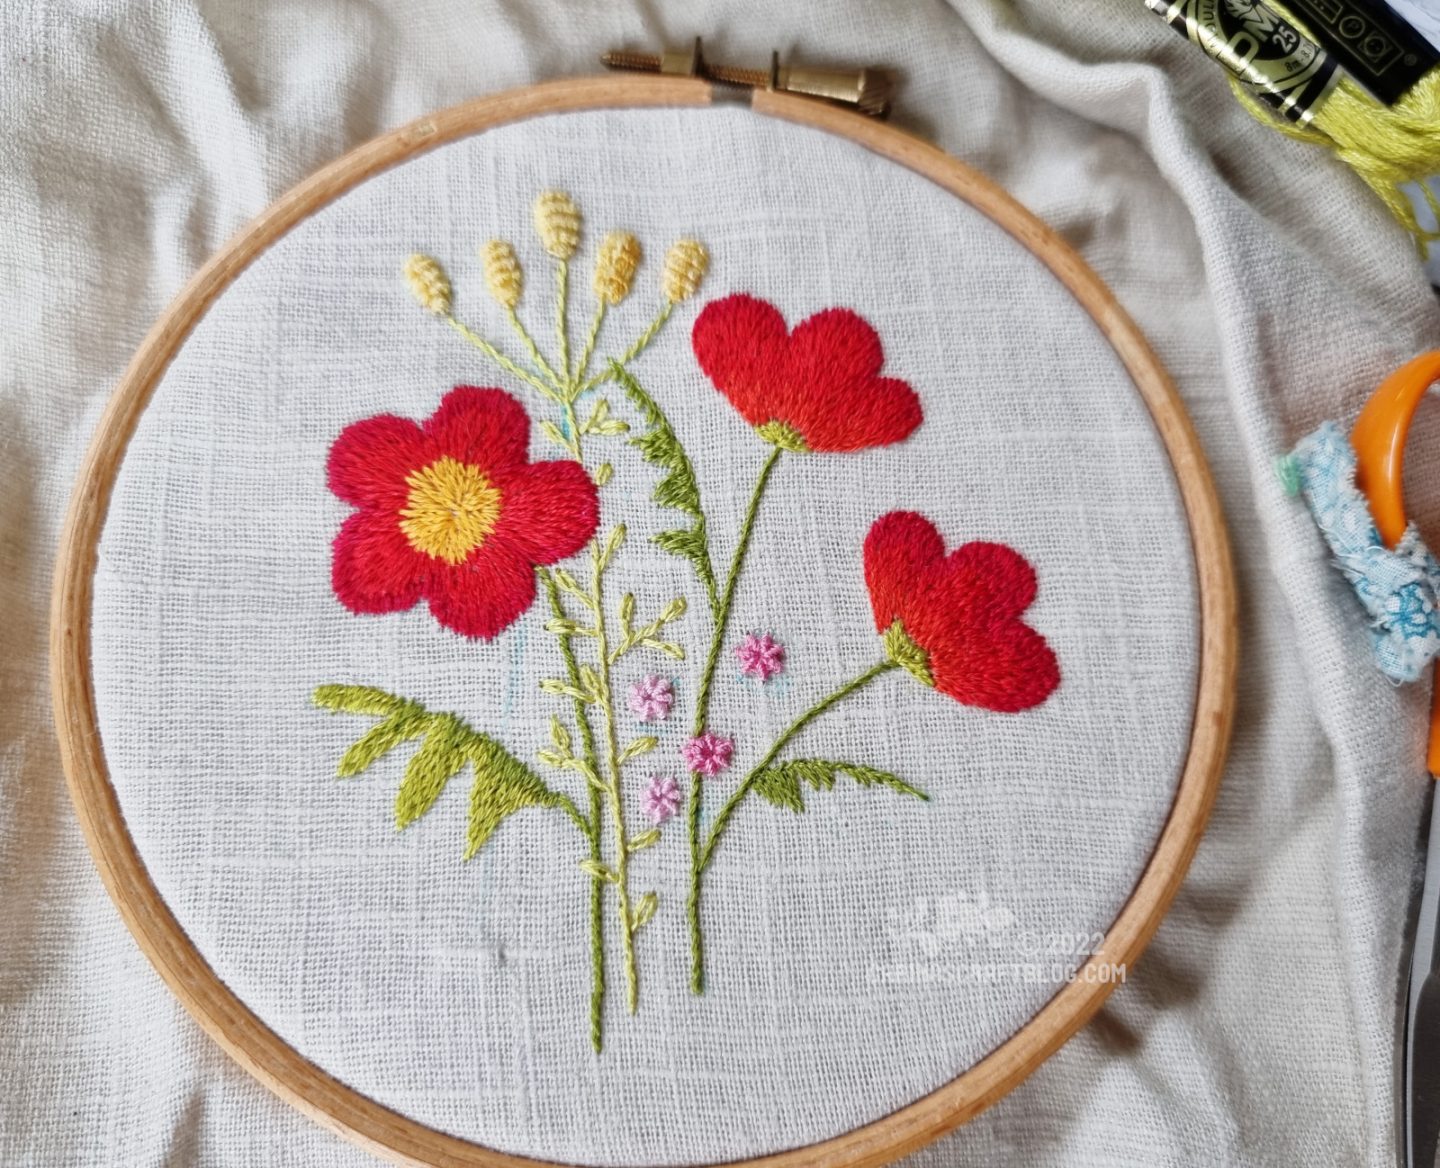 Embroidery hoop seen from above. In the hoop is linen fabric embroidered with red flowers.